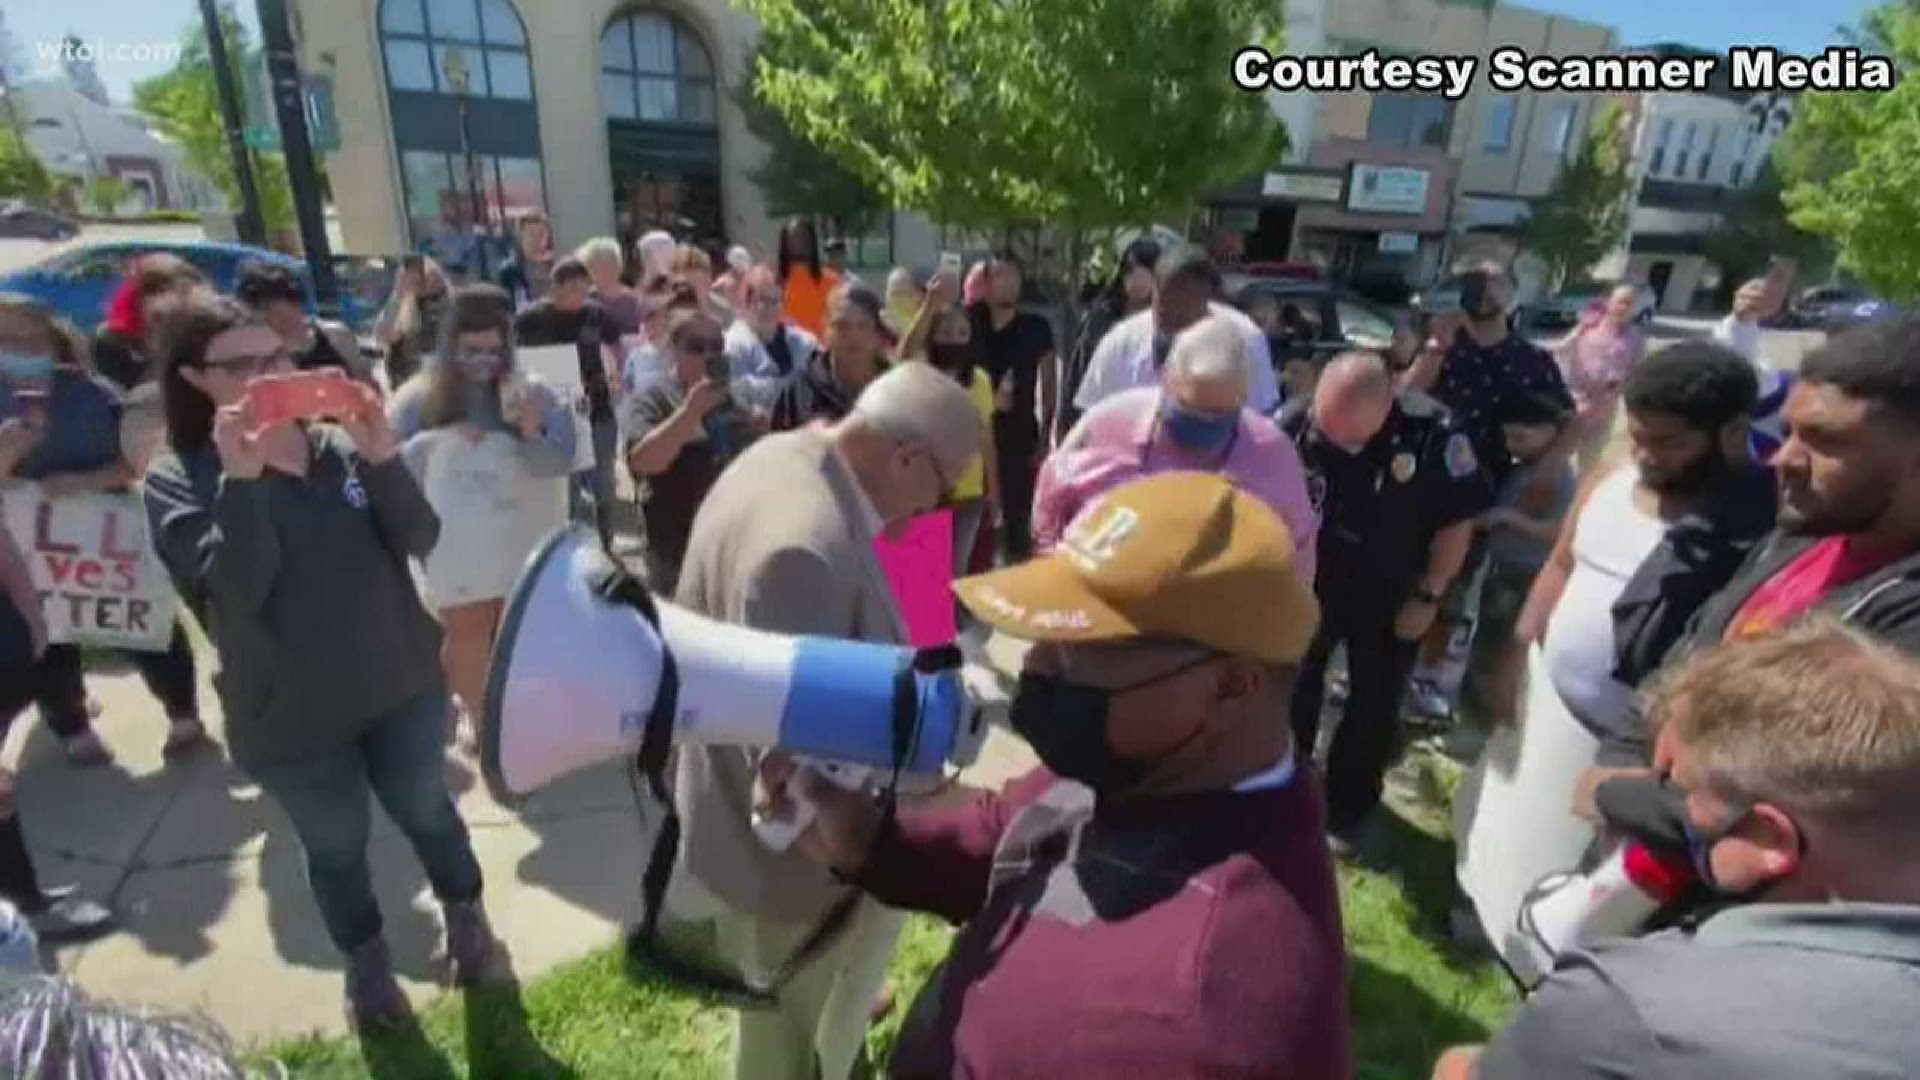 Protesters gathered again on Sunday, this time in west Toledo to call for police accountability after the death of George Floyd in Minneapolis last week